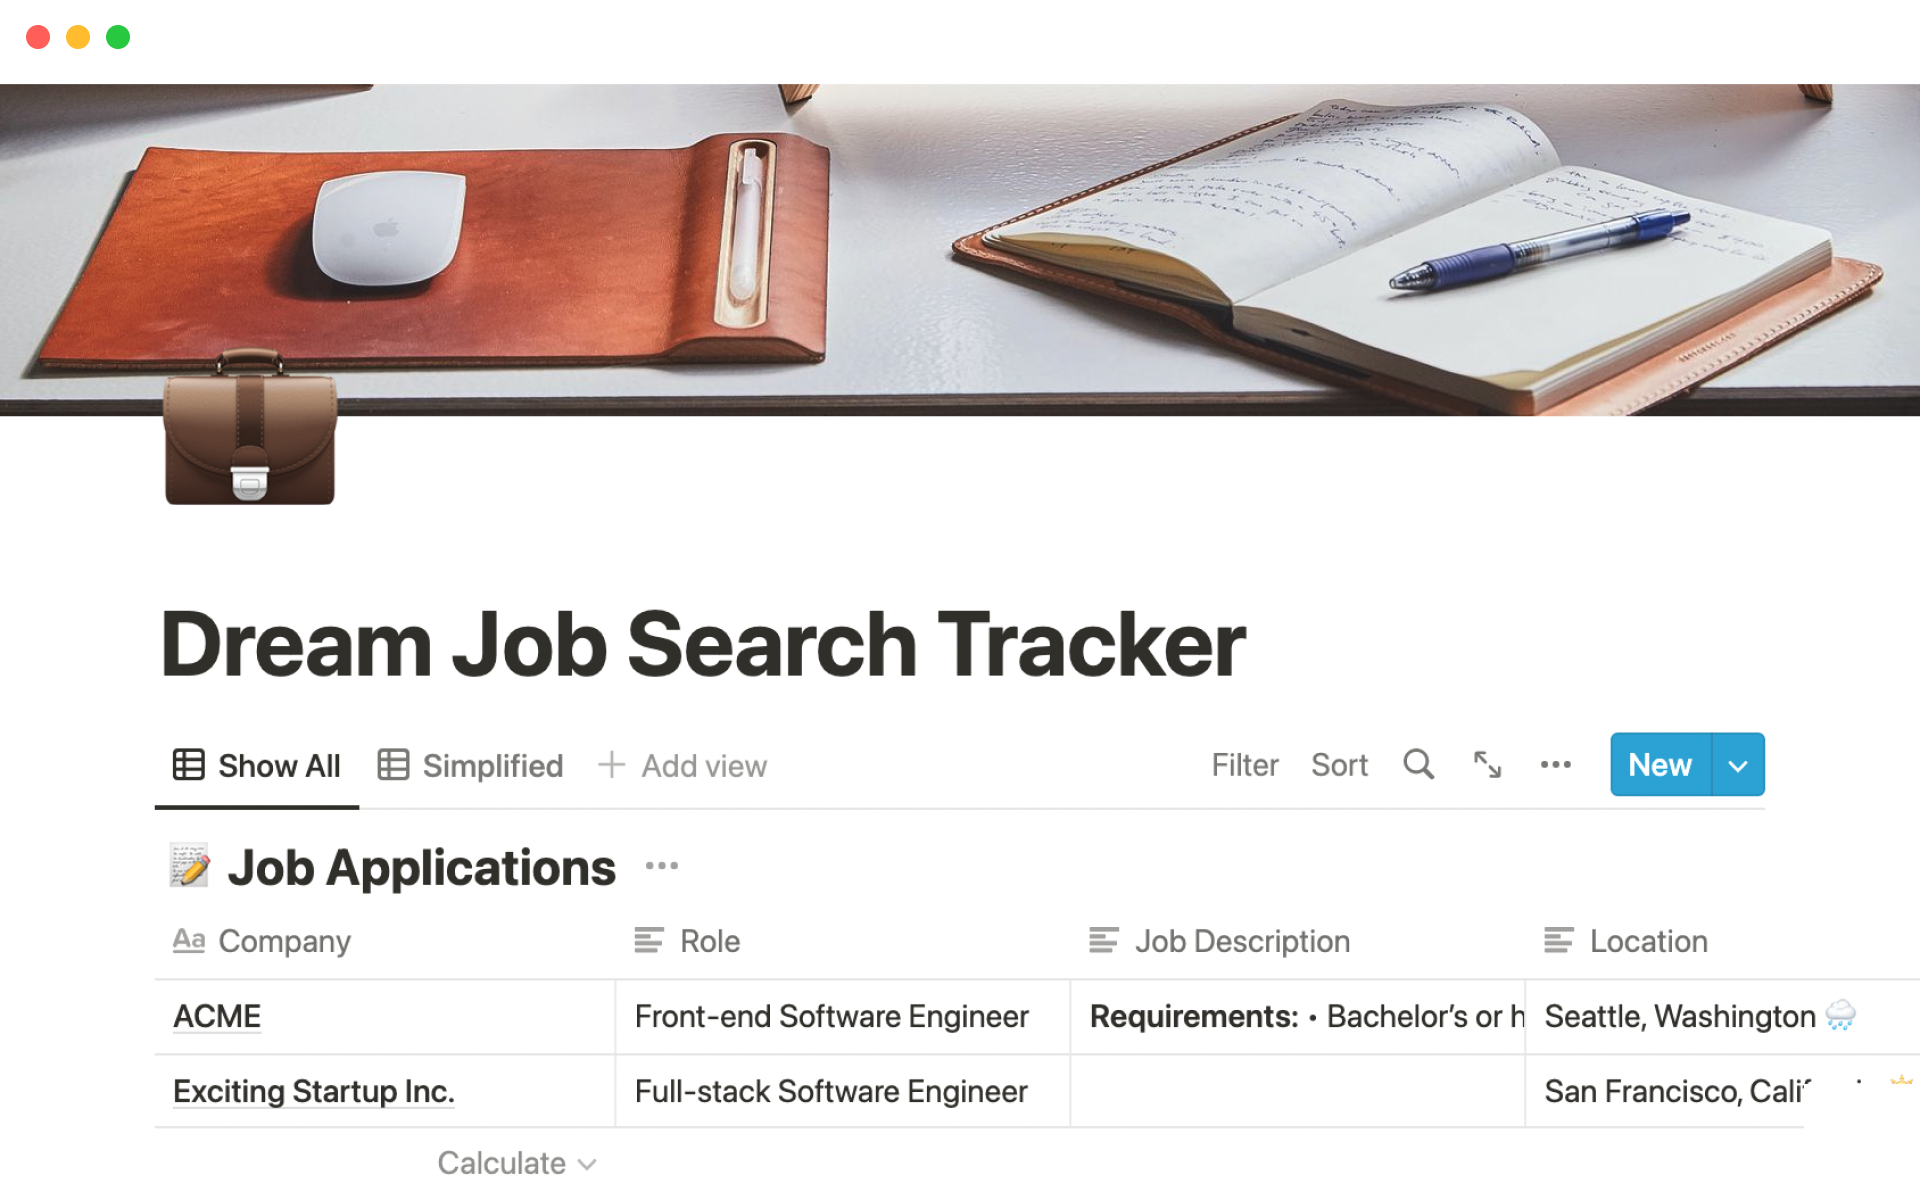 Organize your job search so you can find your dream job.